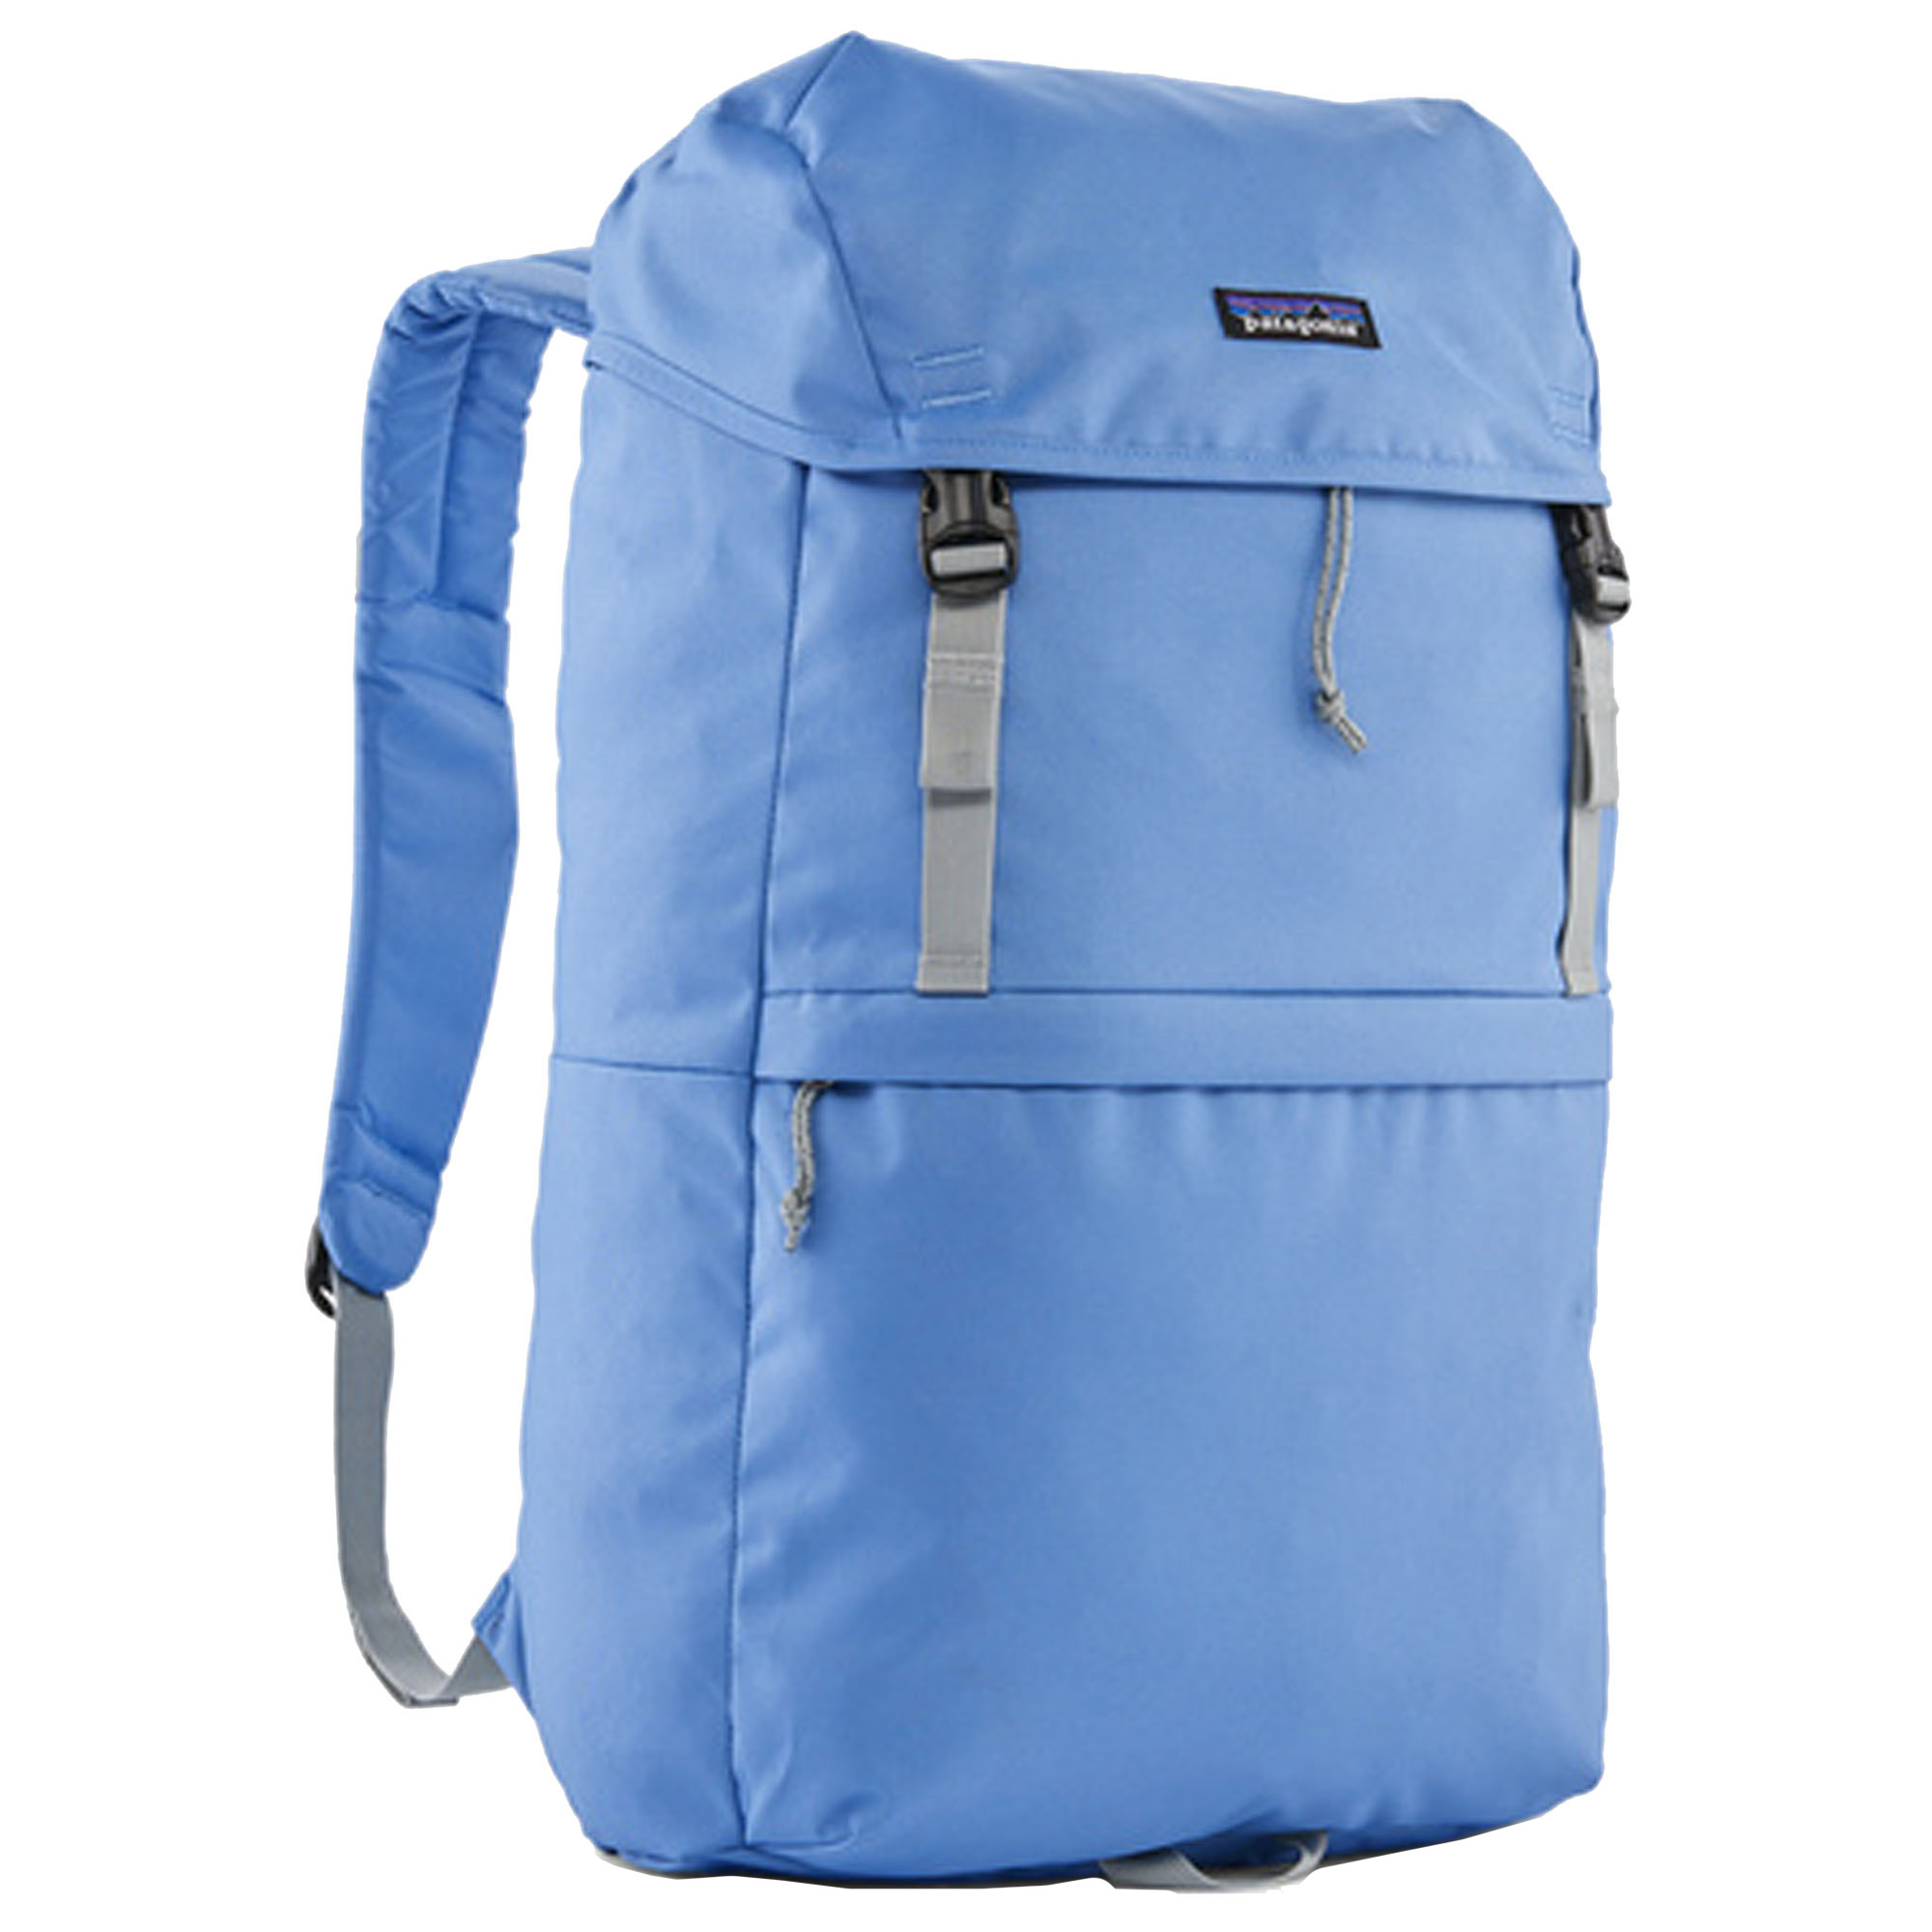 Photos - Backpack Patagonia Fieldsmith Lid 28 /Day Pack, 28L Blue Bird 48546 